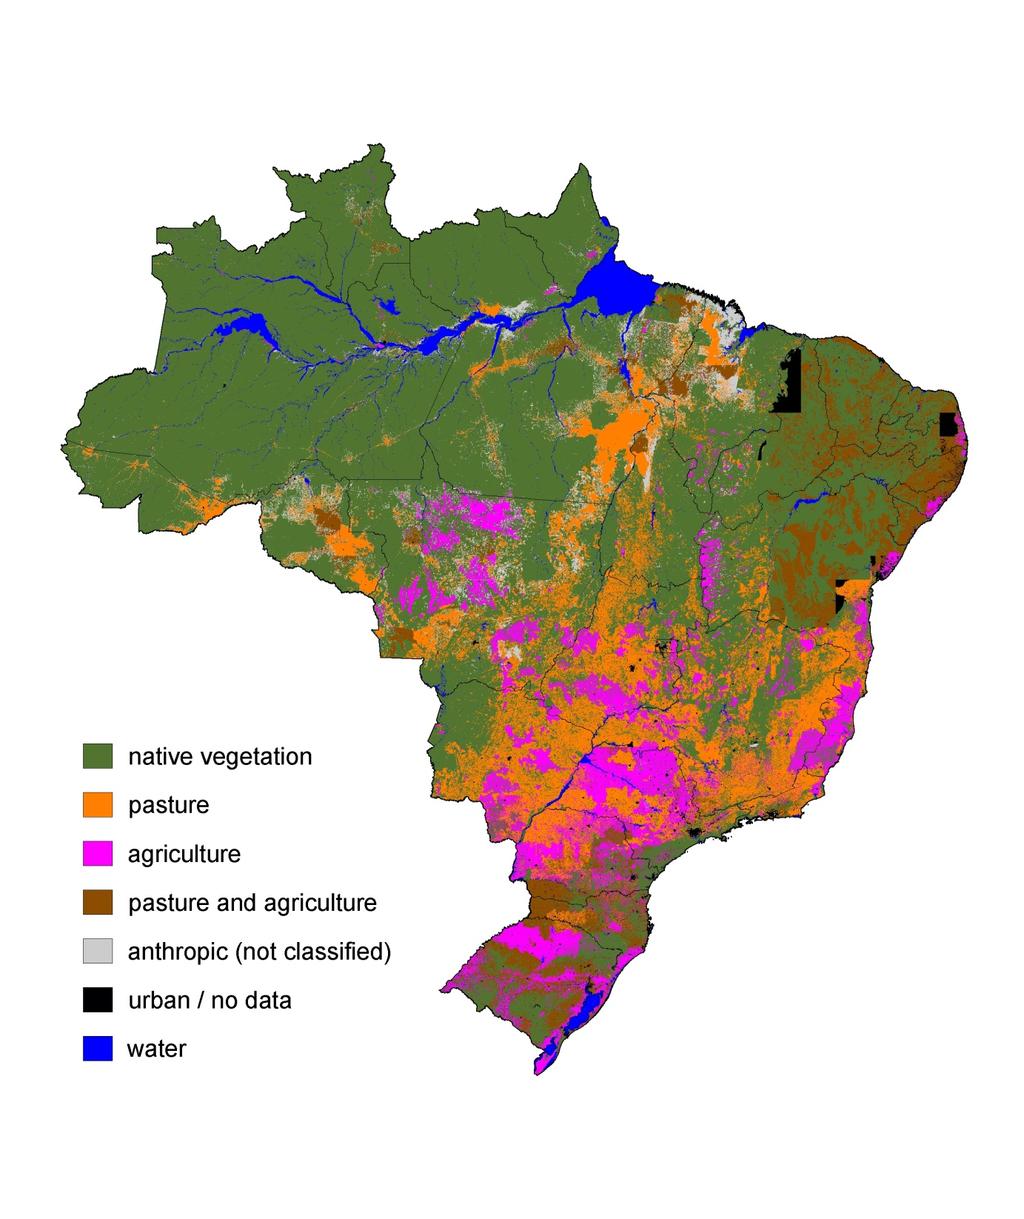 slide 11 of 20 Pastures A Brazil s case Natural vegetation Pasture Crop Mixed (C & P) Other Urban & no data Water Where it is